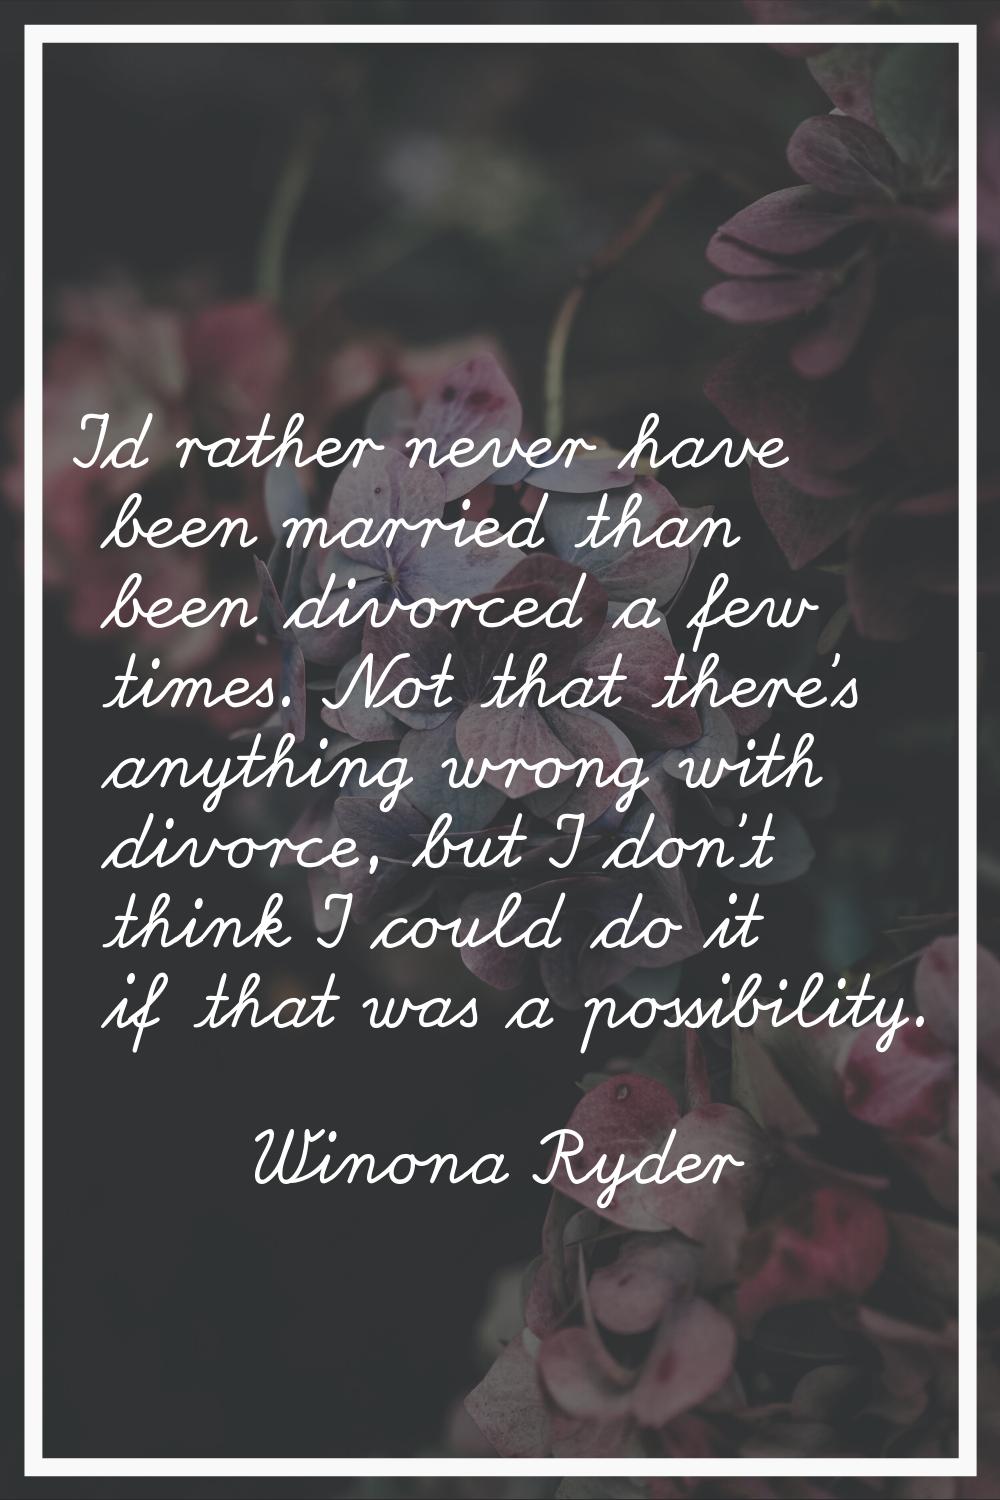 I'd rather never have been married than been divorced a few times. Not that there's anything wrong 